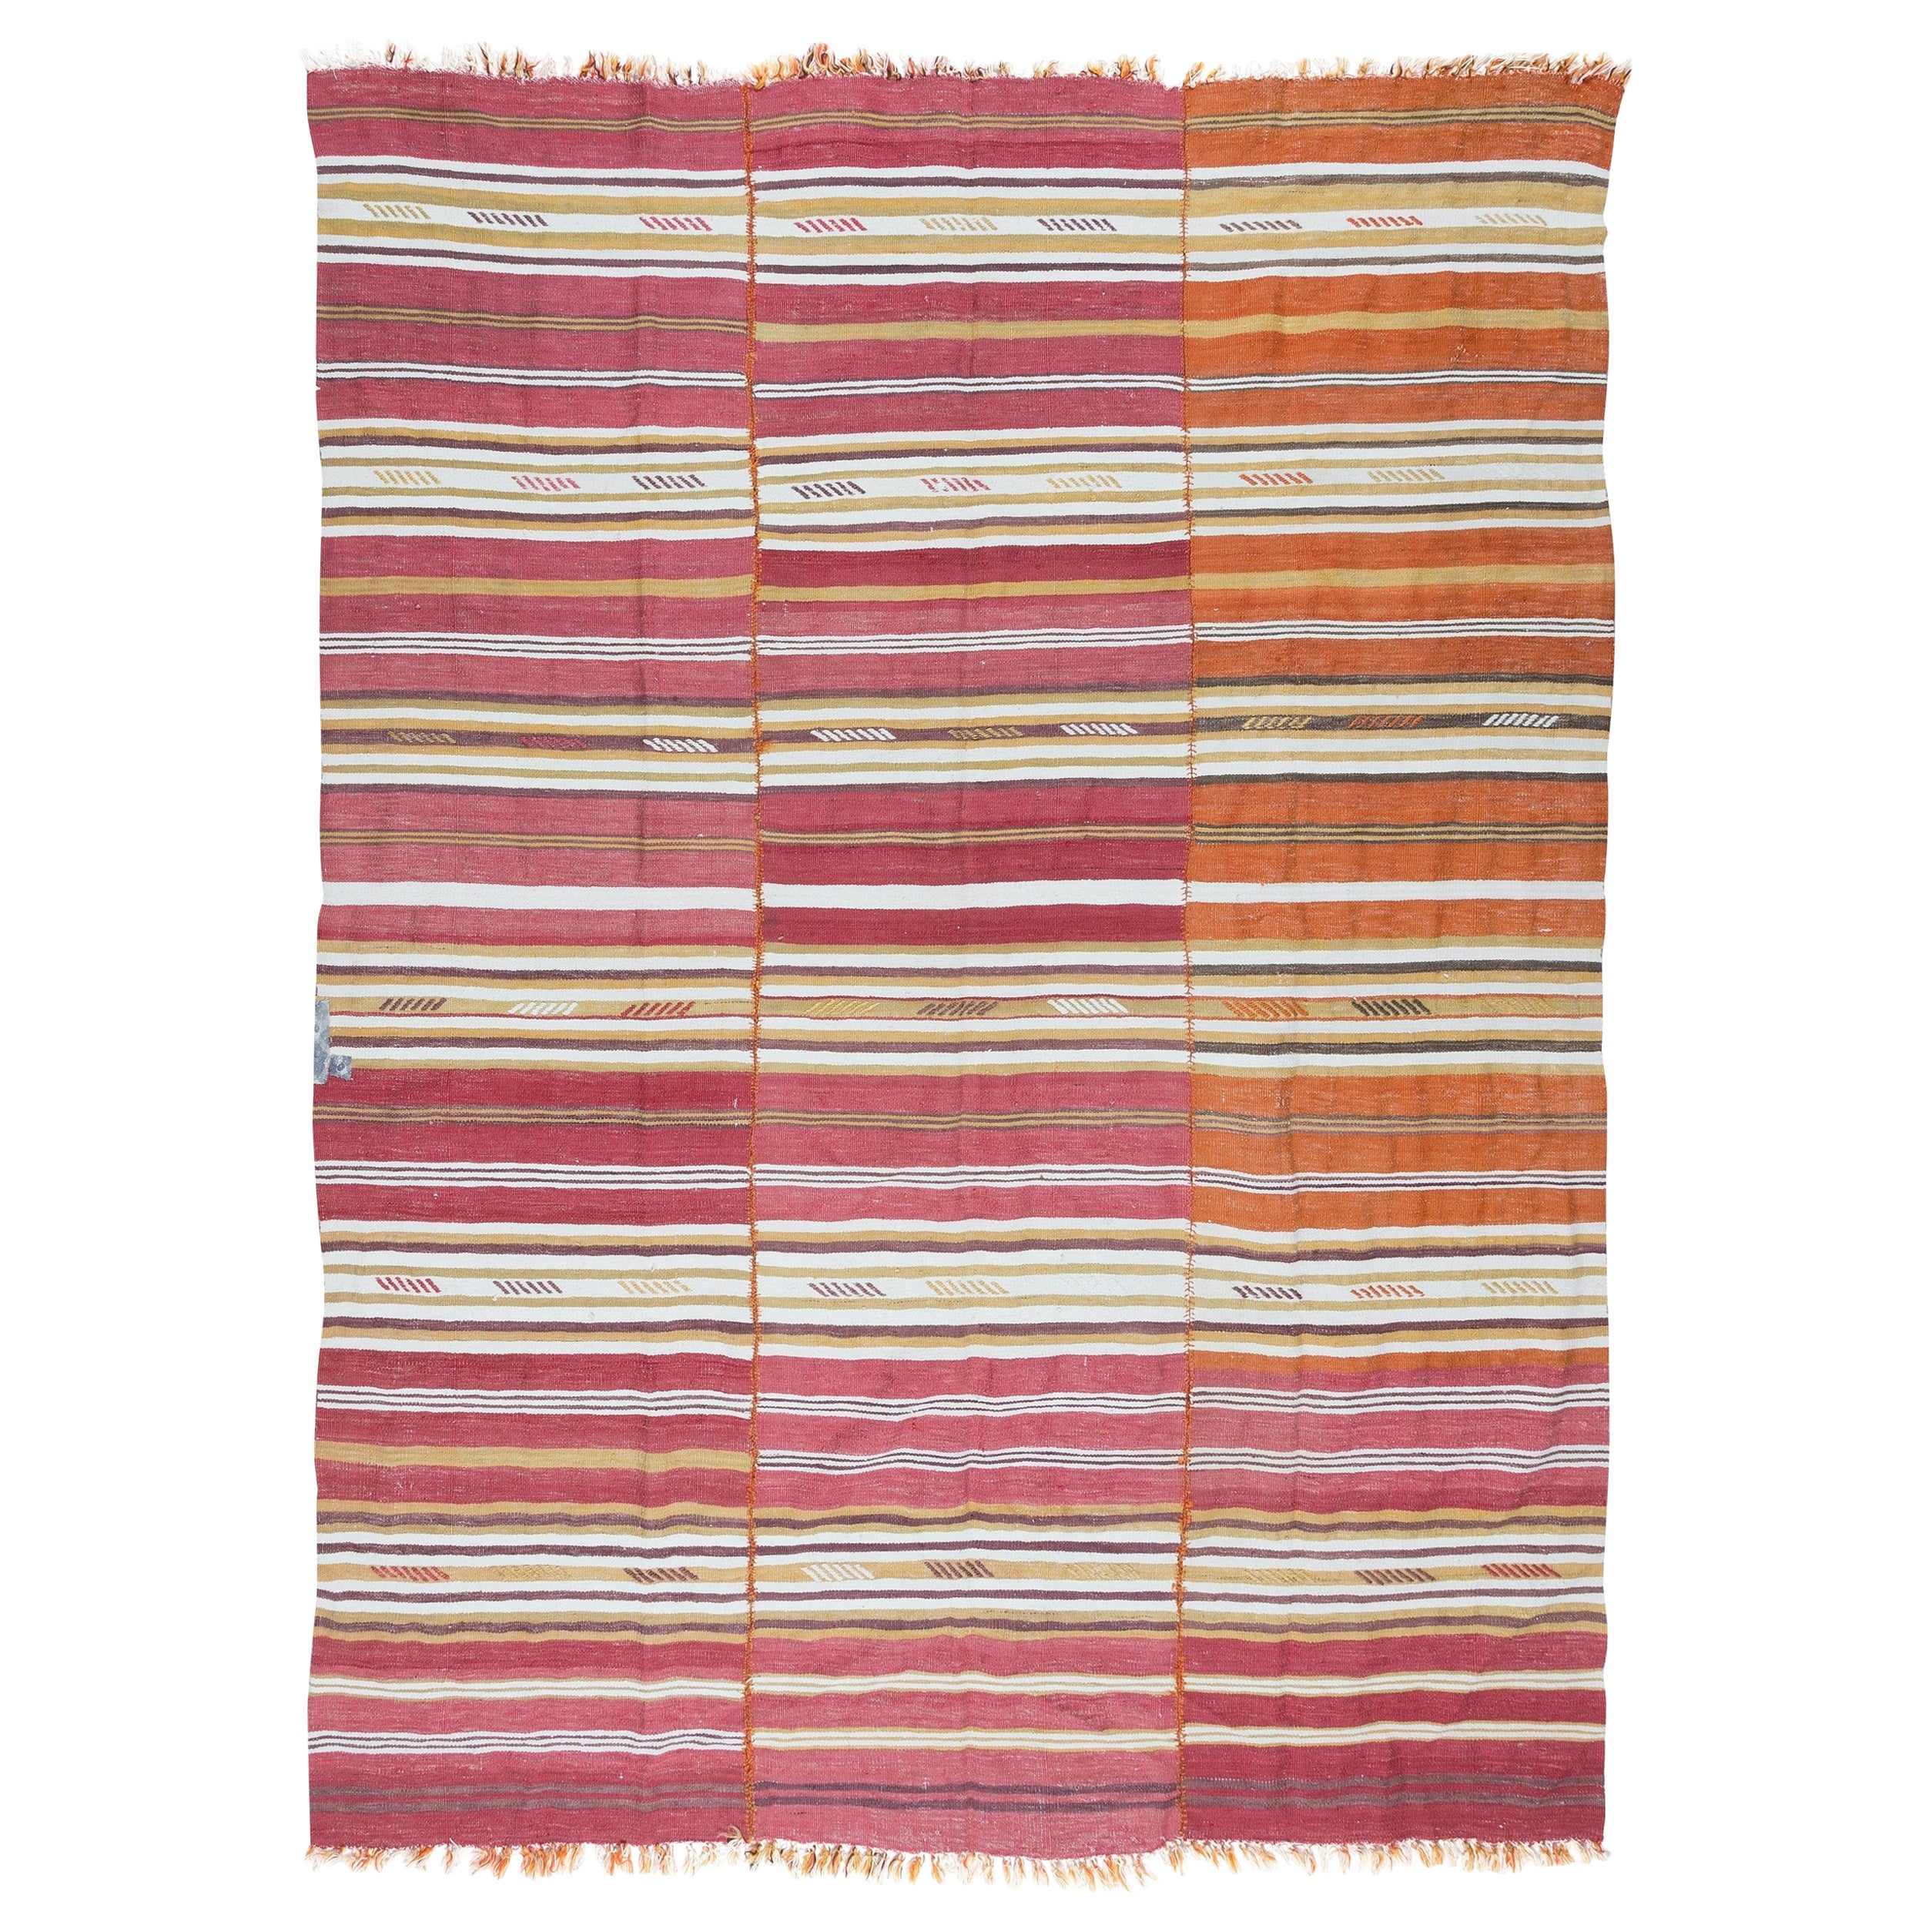 6x8 Ft Hand-Woven Anatolian Kilim, Striped Multicolor Rug, Flat-Weave, 100% Wool For Sale